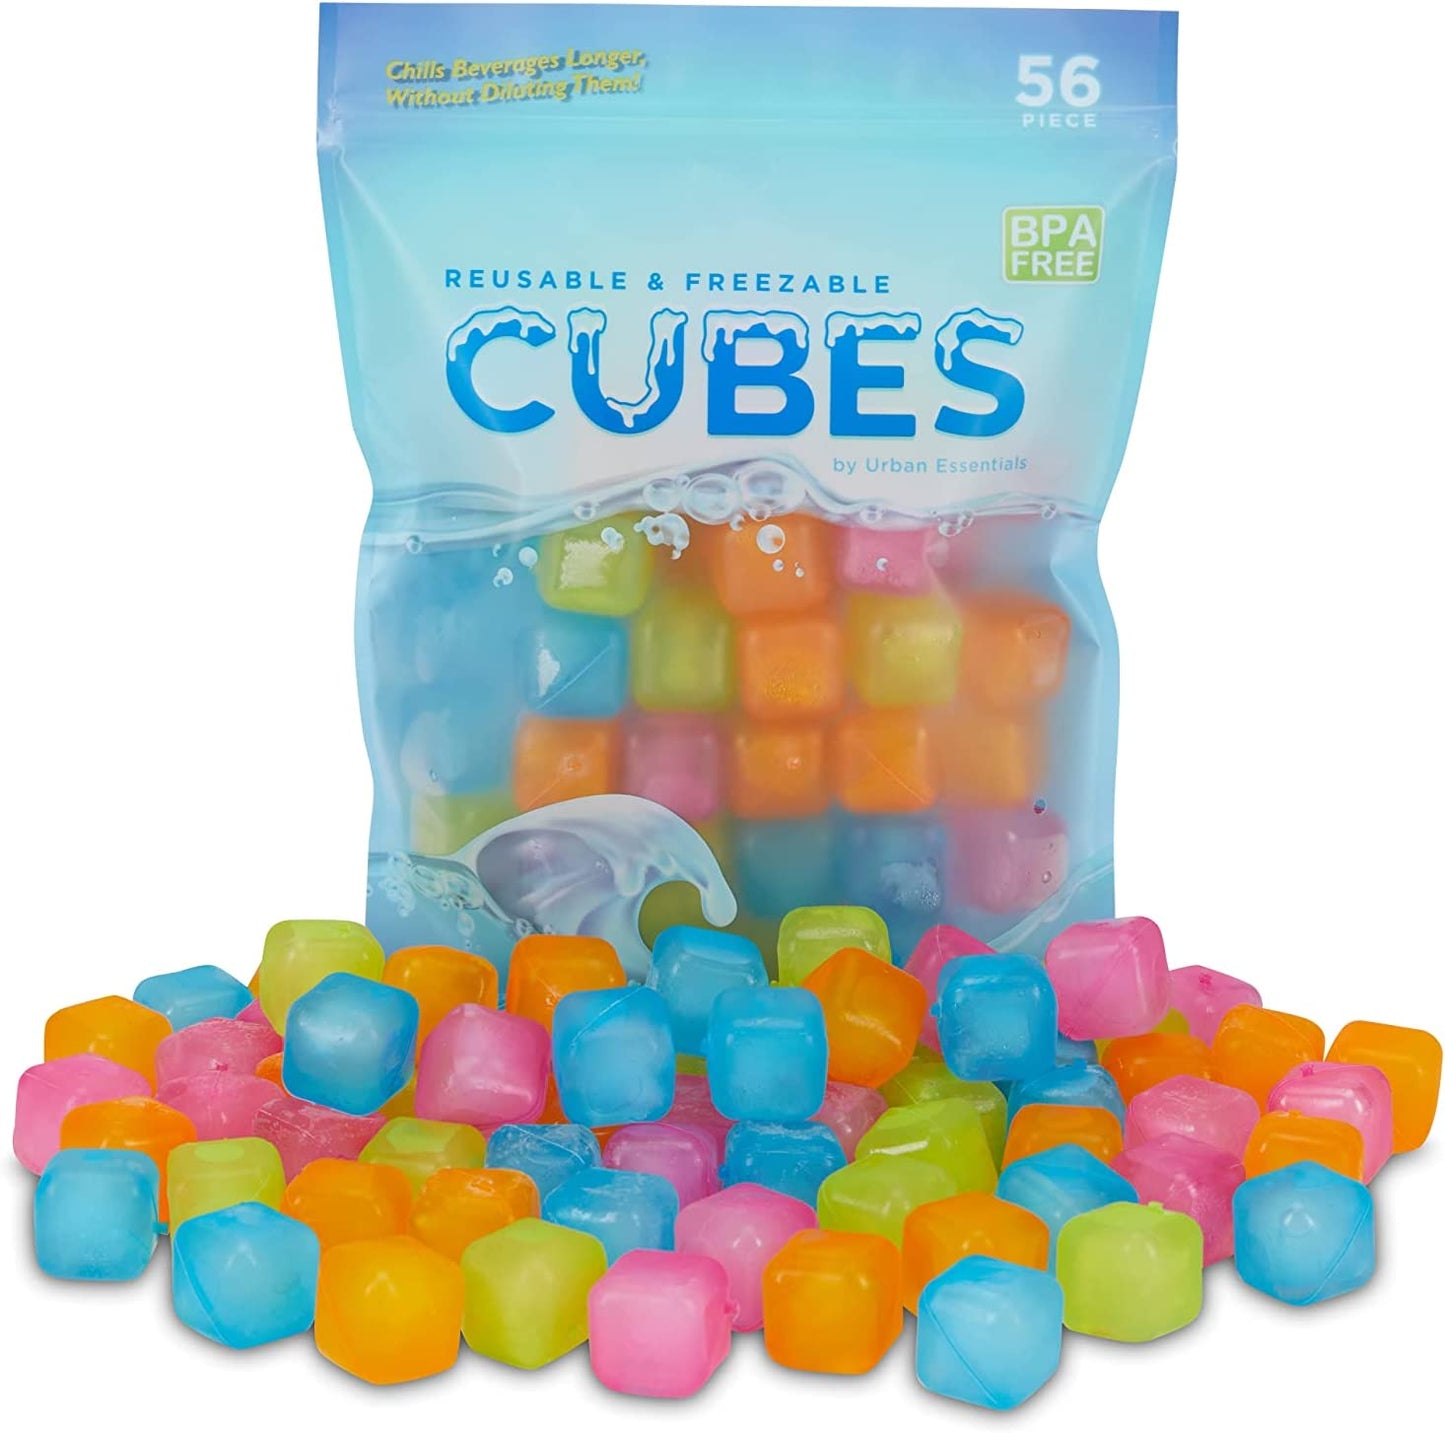 Disposable Ice Cube Bag 42 Pack (1176 Ice Cubes, 42 Bags)